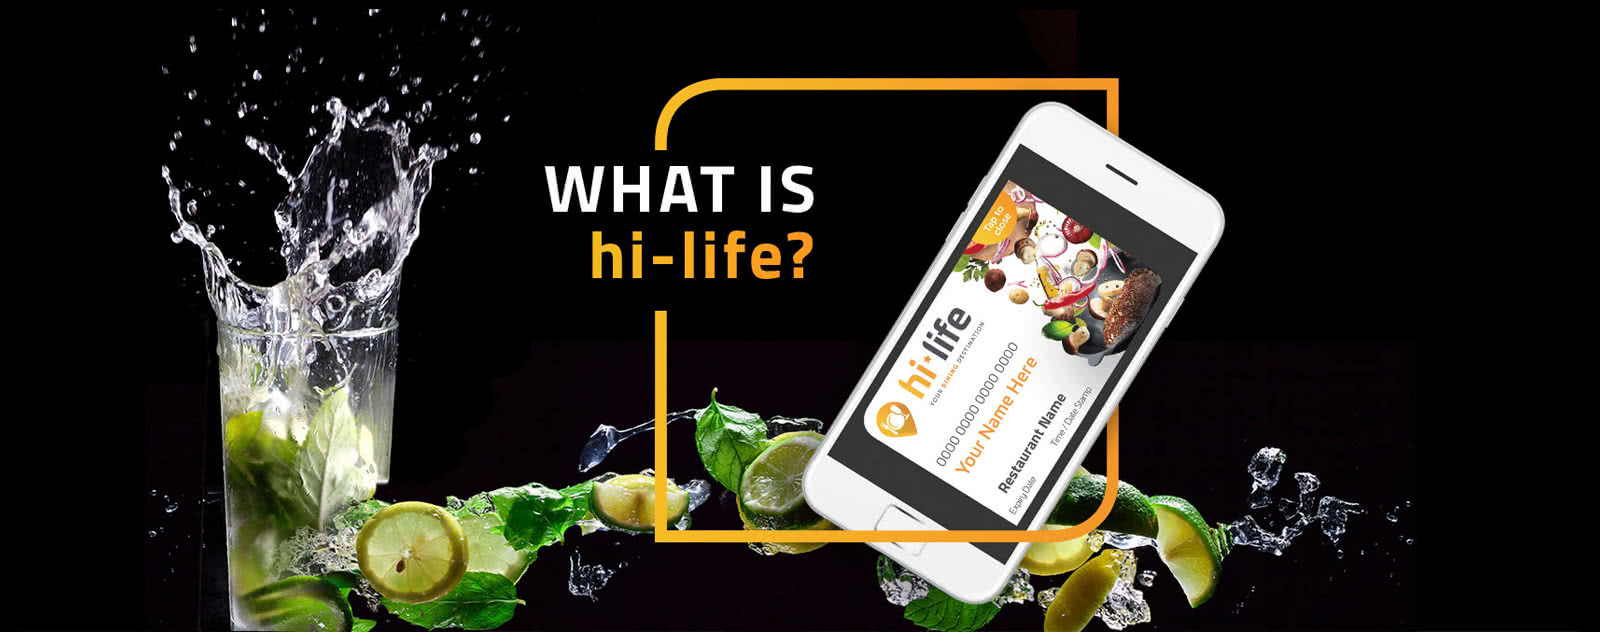 What is hi-life?